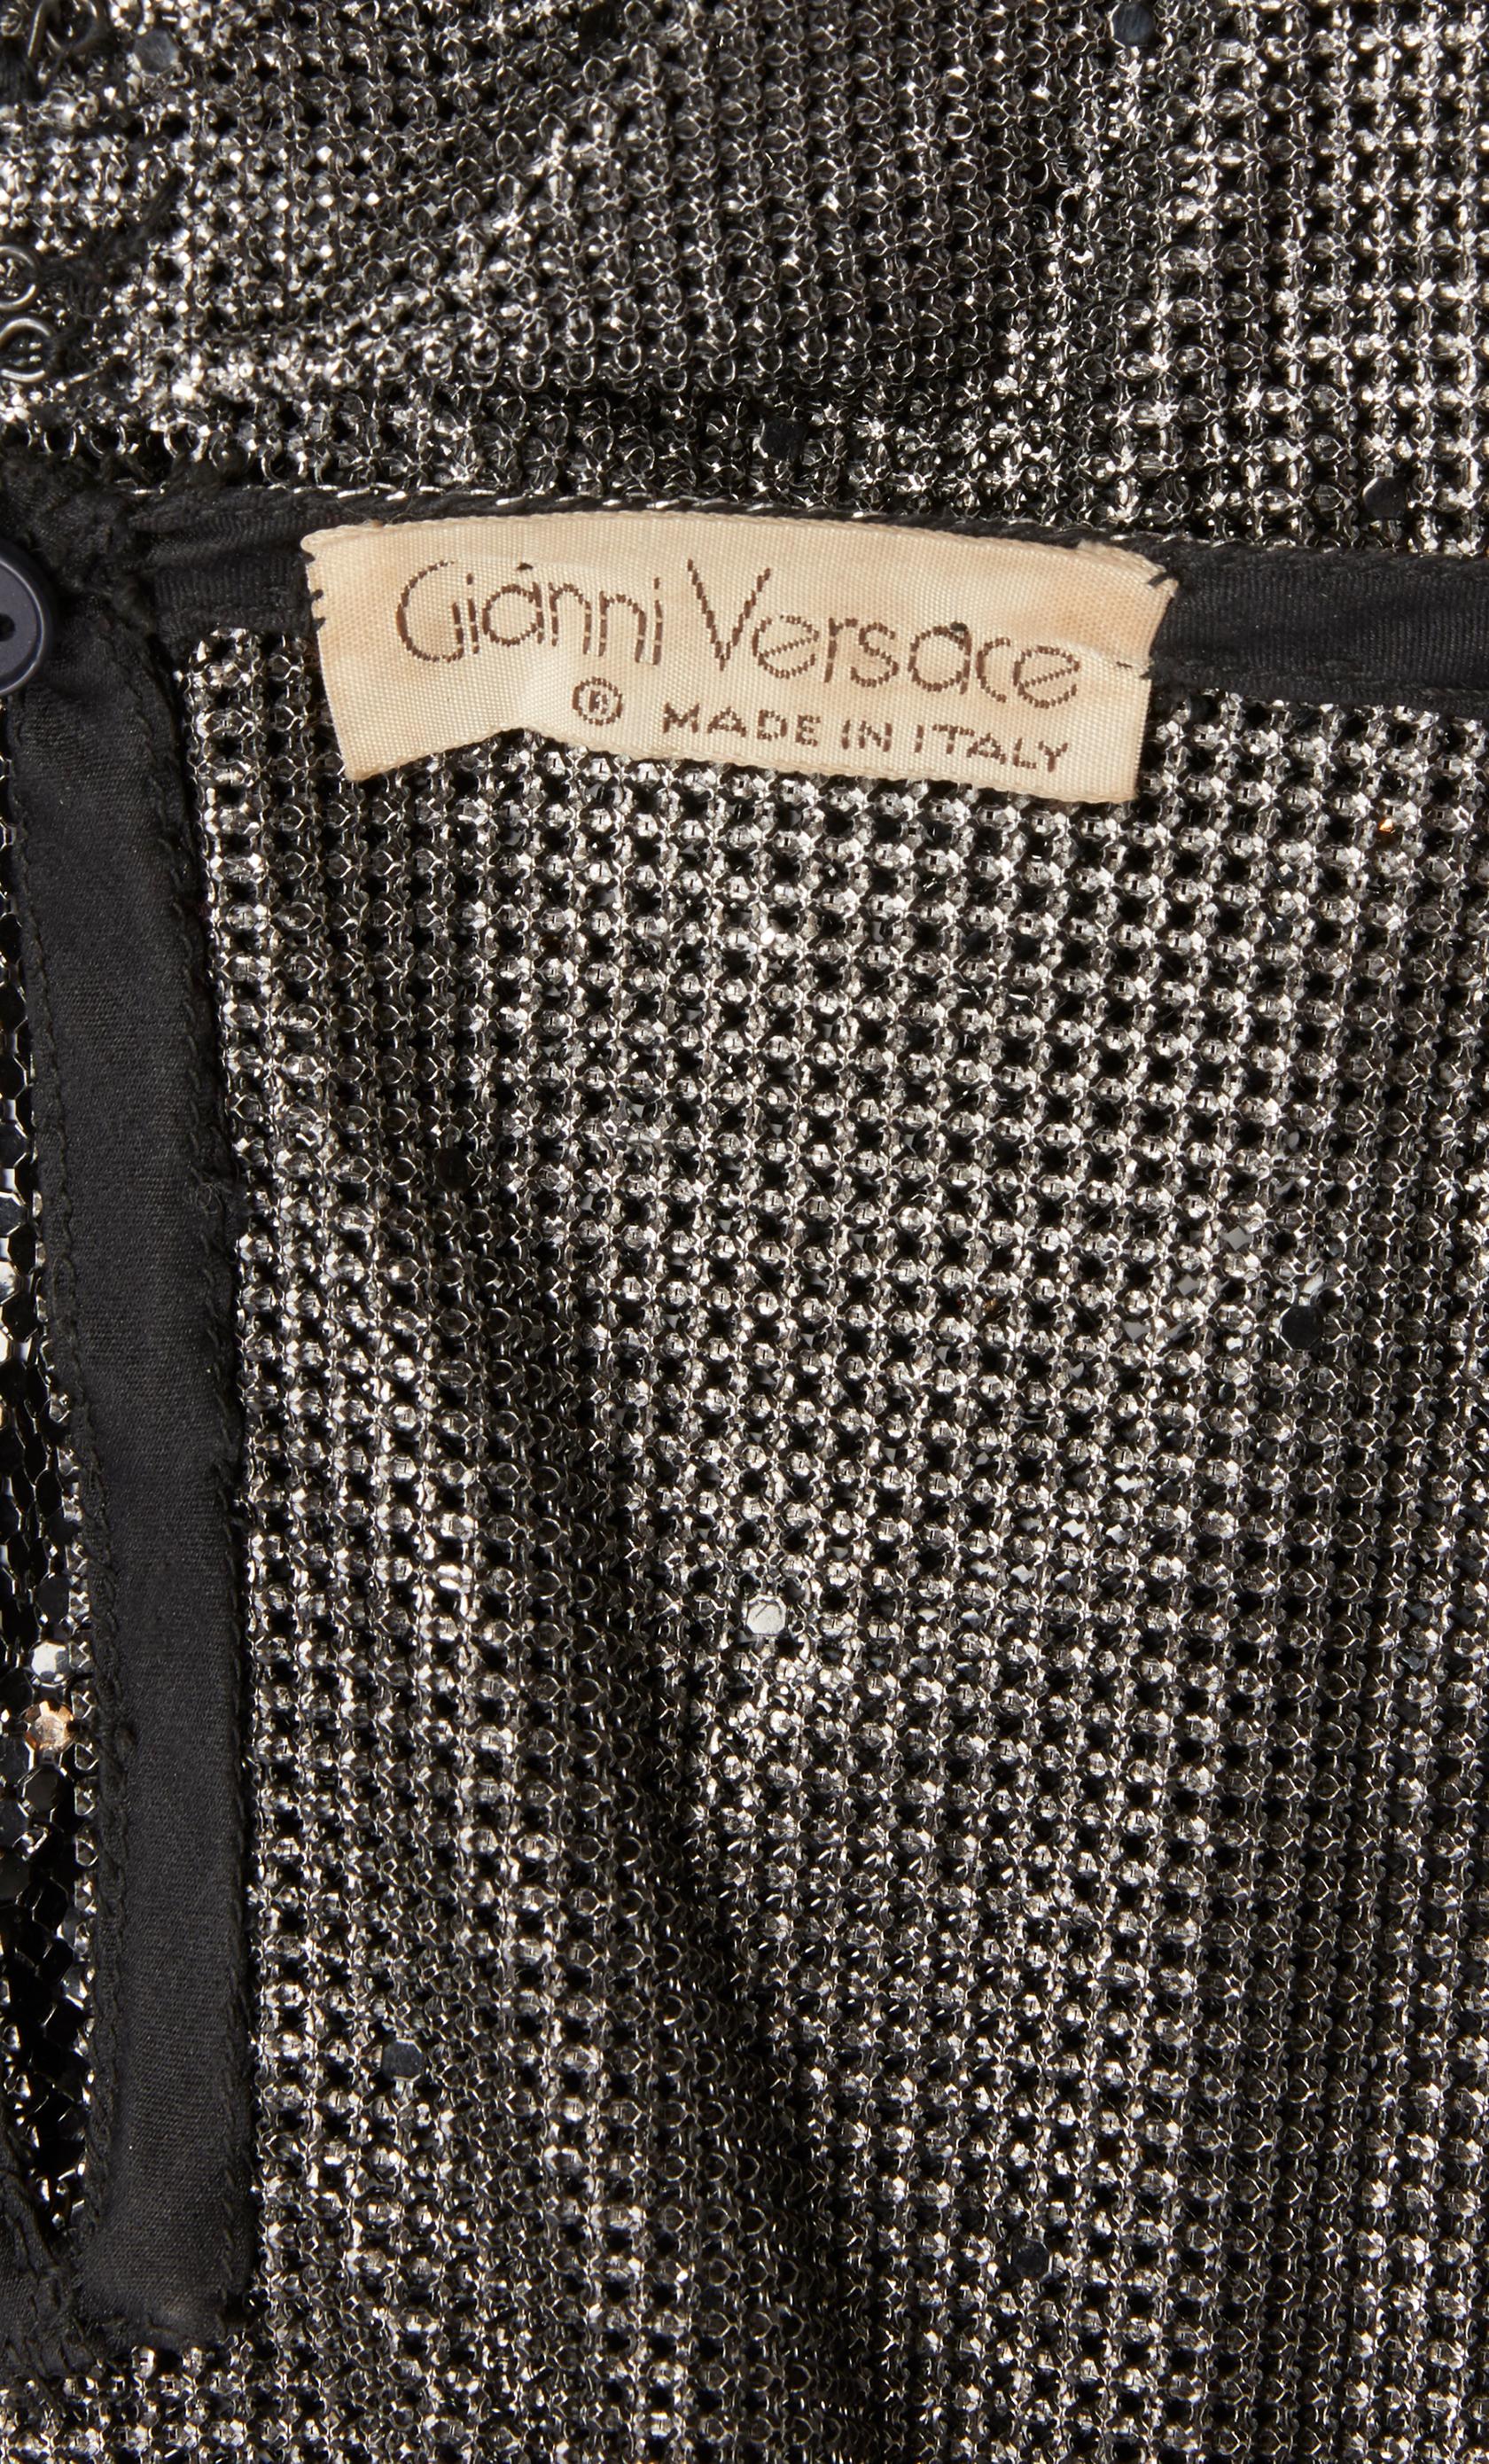 Gianni Versace Couture, Mesh metal Oroton top, Autumn/Winter 1983  In Good Condition For Sale In London, GB